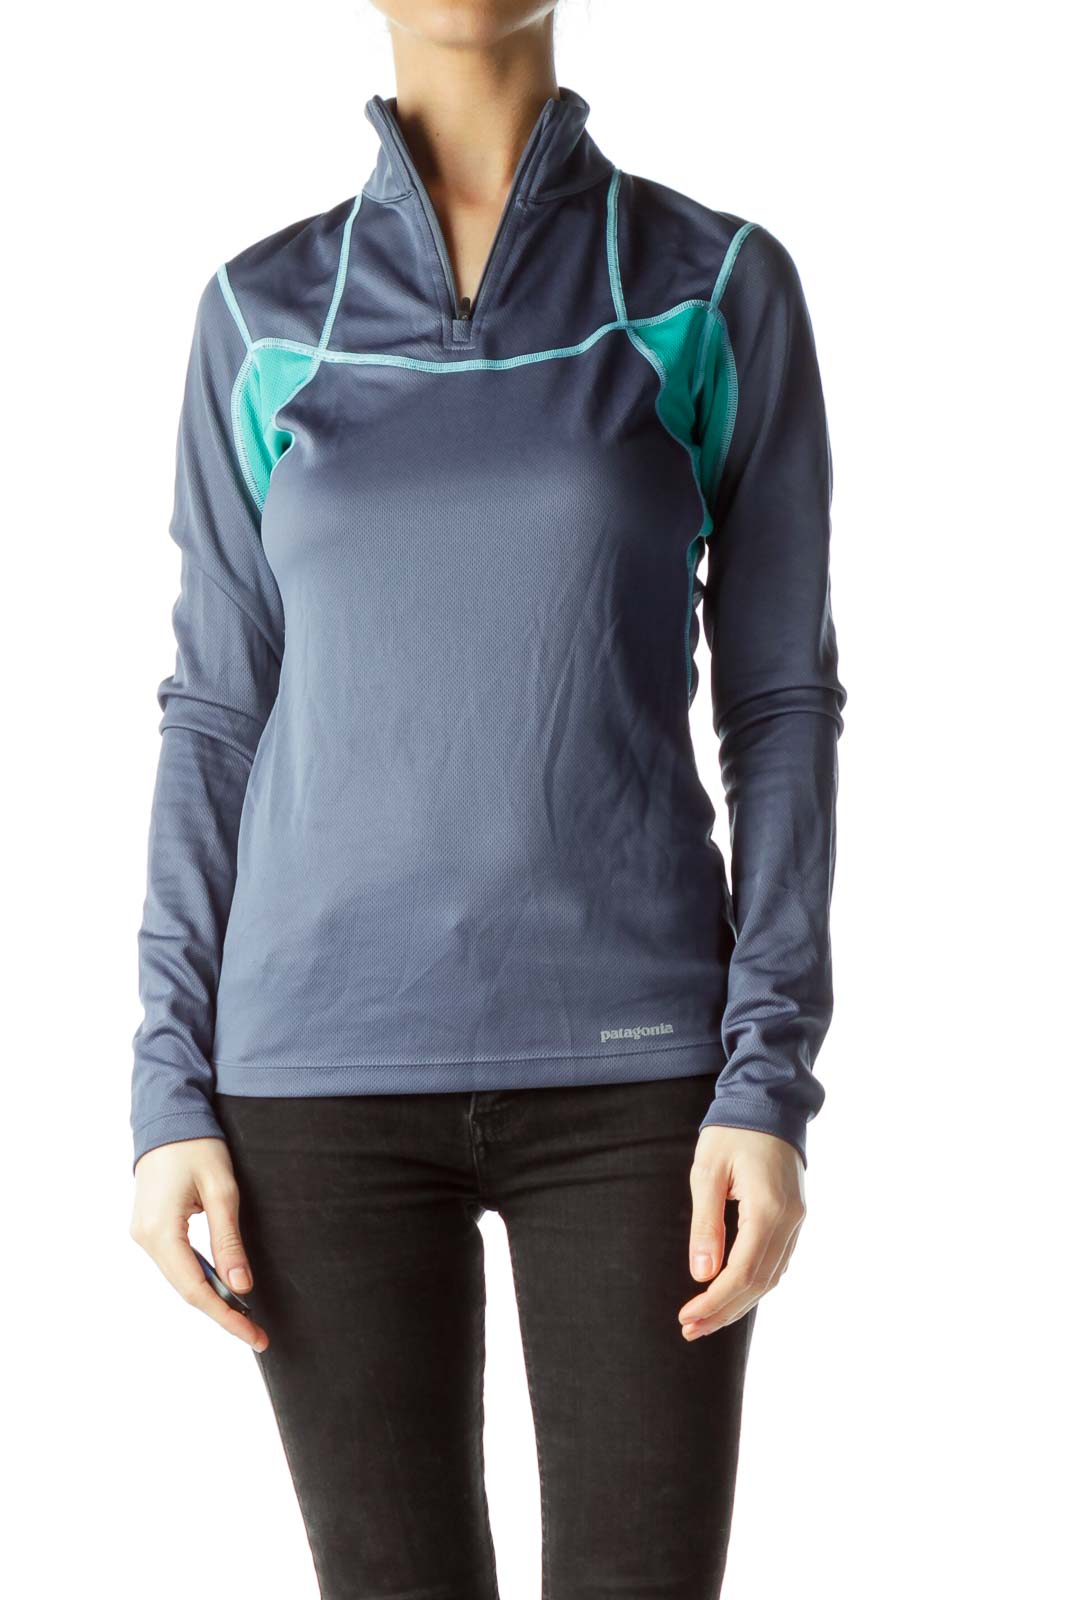 Blue Green Zippered Pullover Top Front